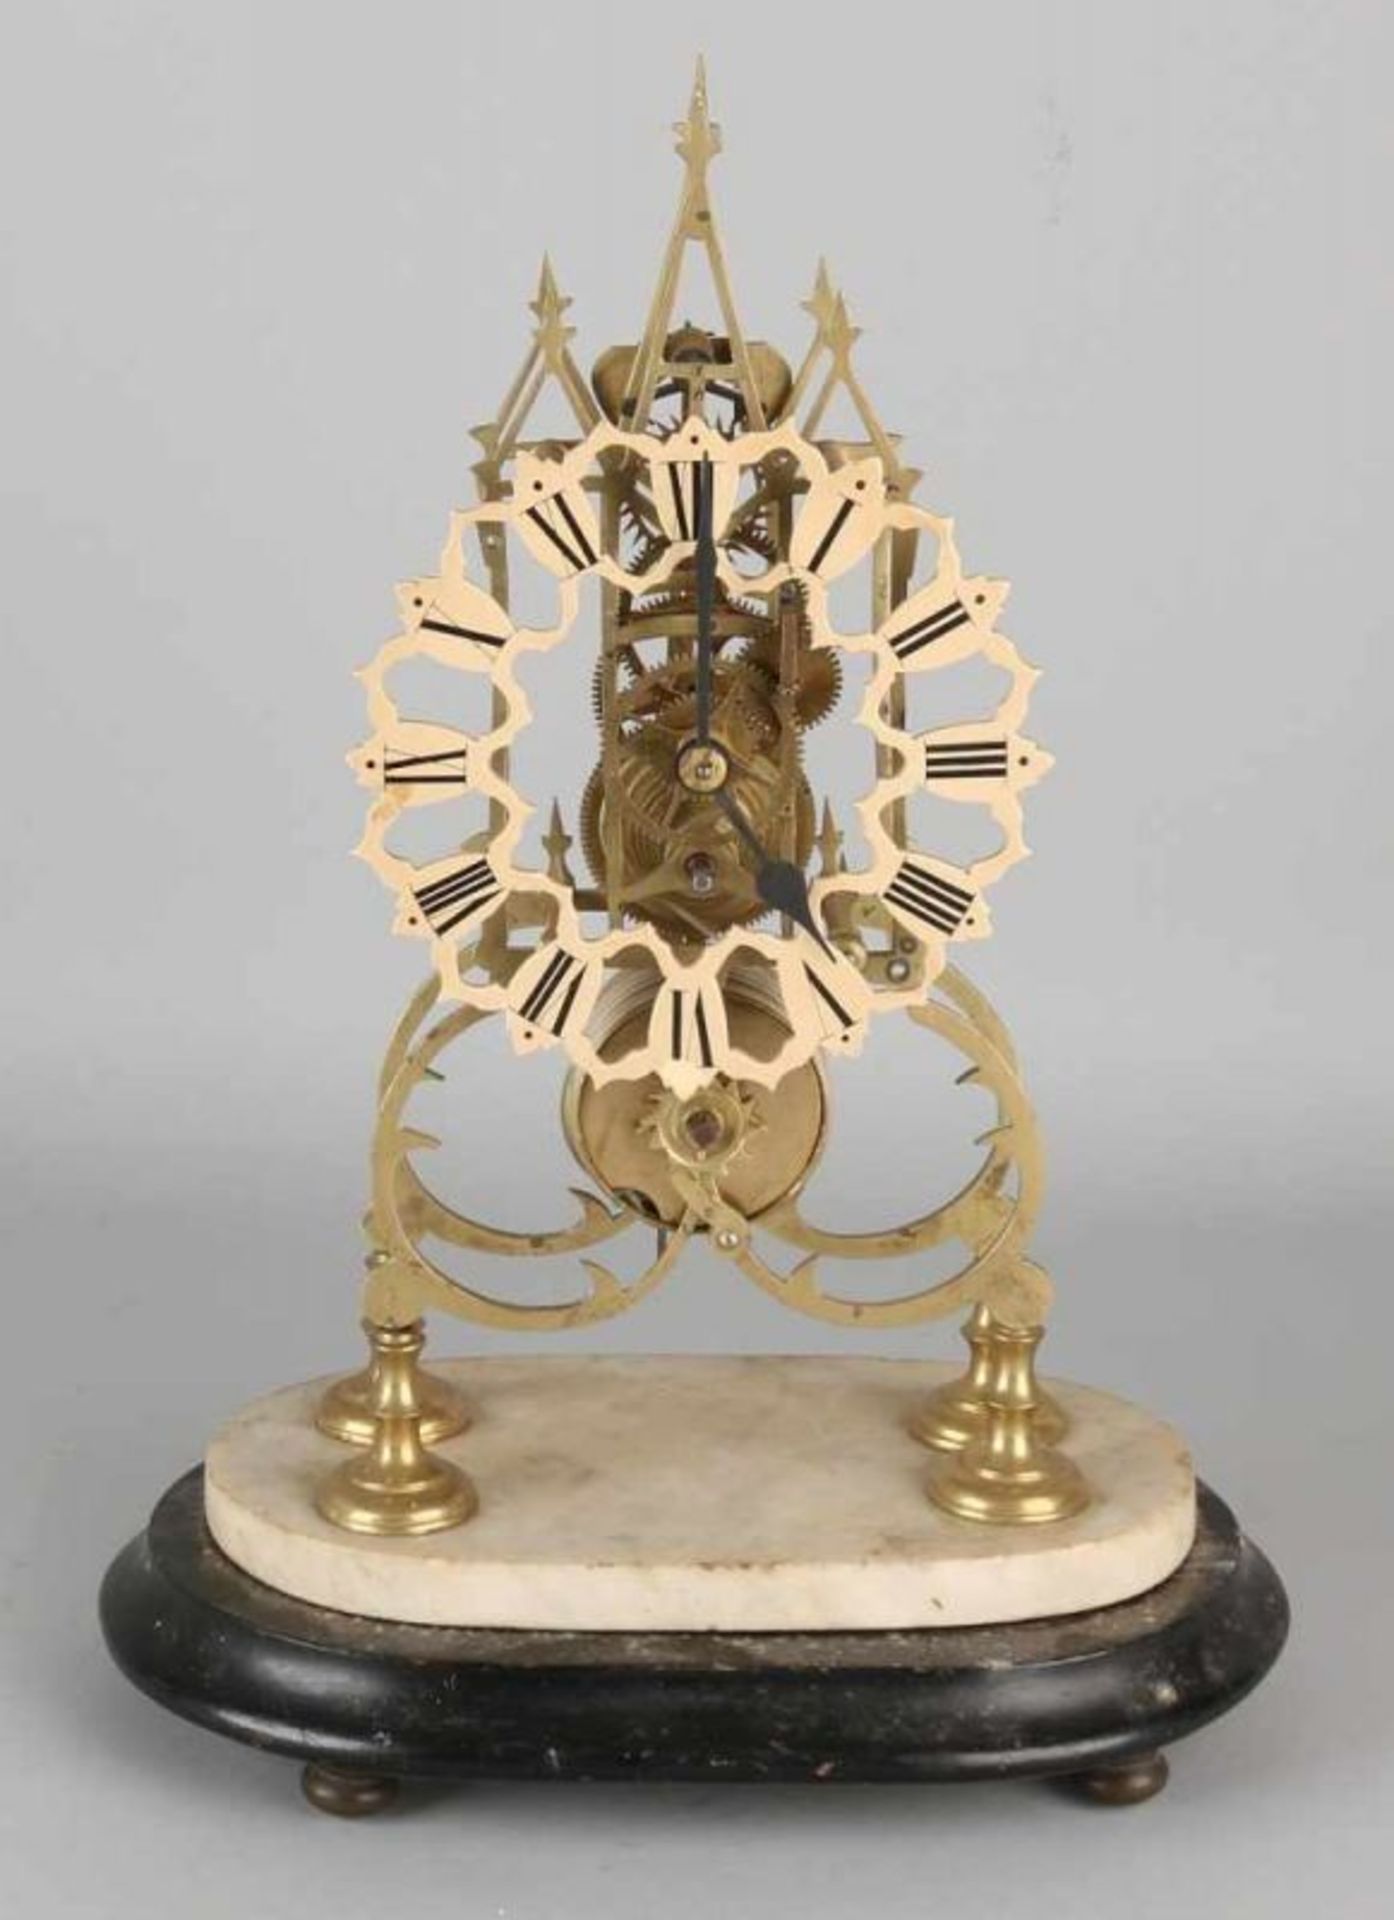 Antique English brass skeleton clock with fusee. On wood with alabaster basement. Circa 1880.